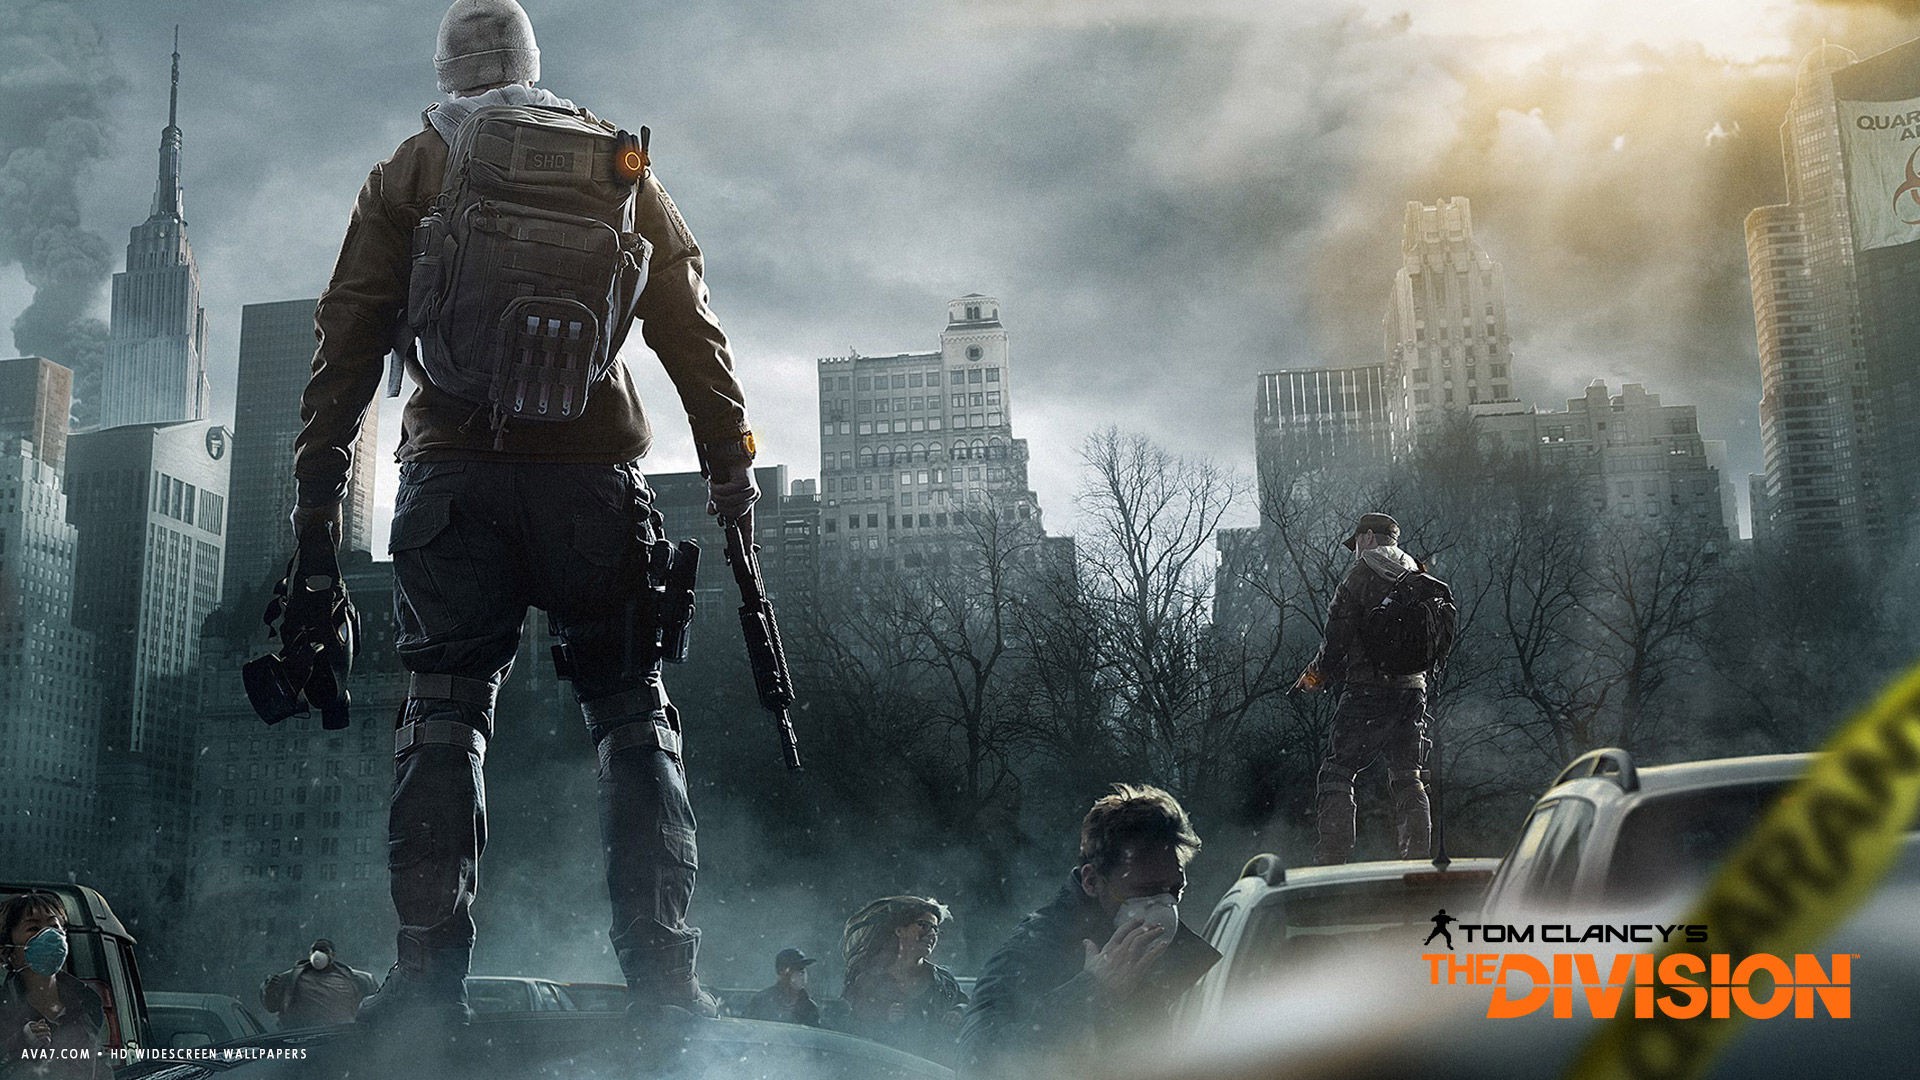 General 1920x1080 video games Tom Clancy's The Division PC gaming video game art